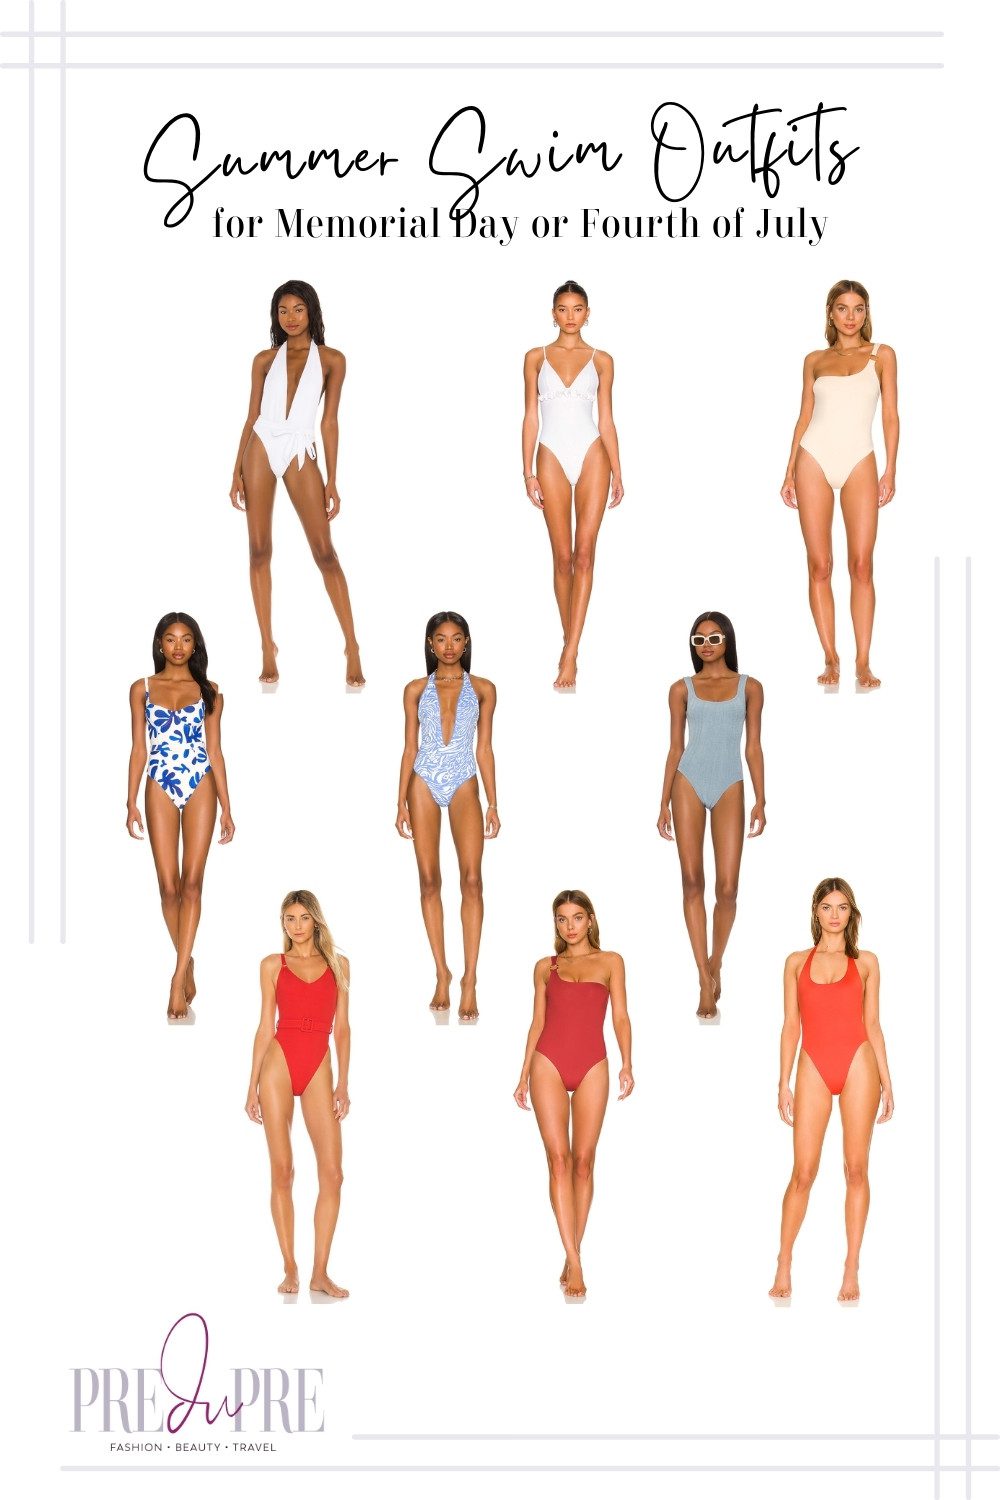 Collage of red, blue, and white one piece swimsuits for Memorial Day and/or Independence Day on Fourth of July.